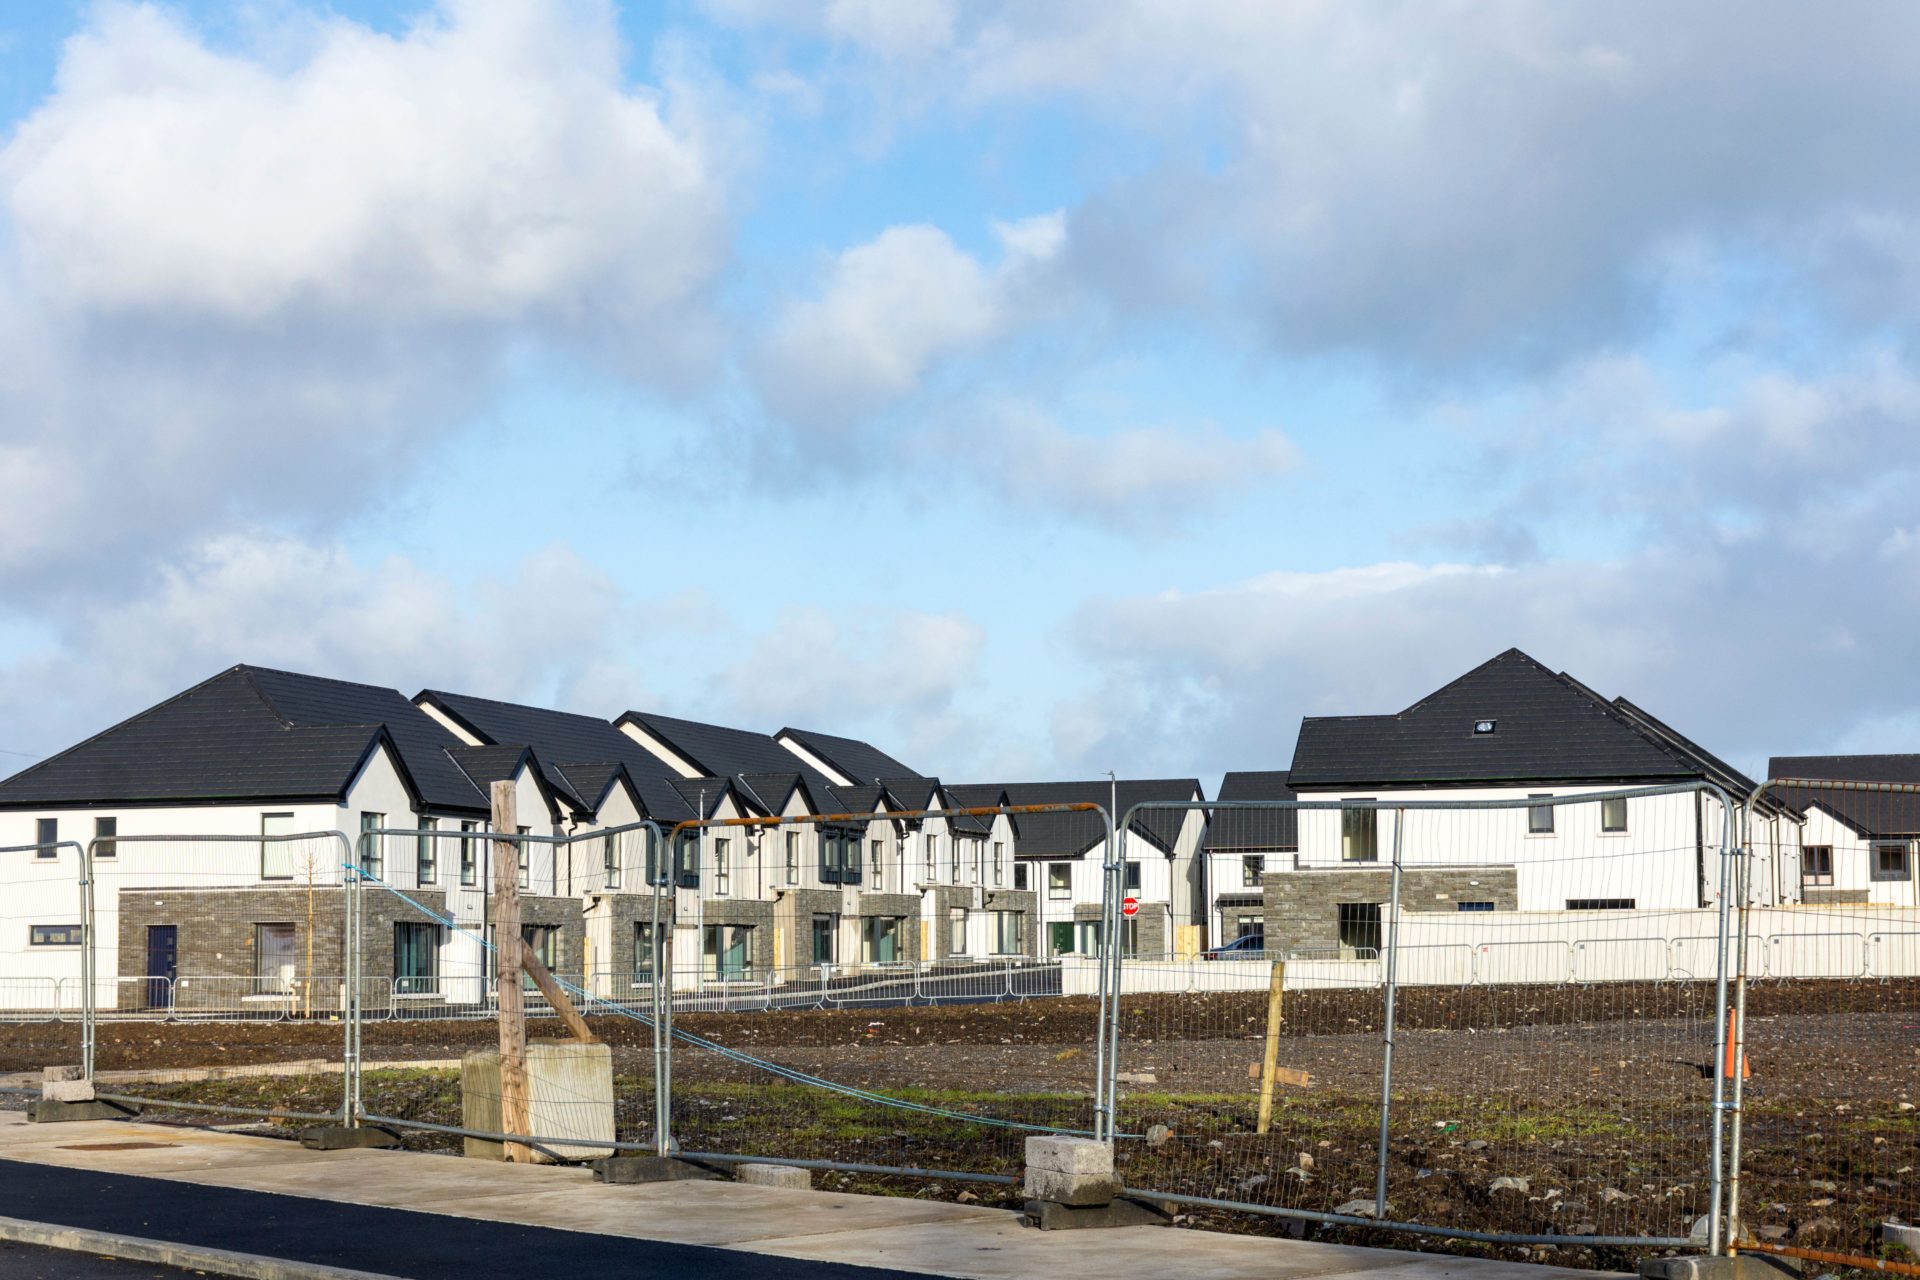 2N322YF New build housing estate in Donegal Town, County Donegal, Ireland